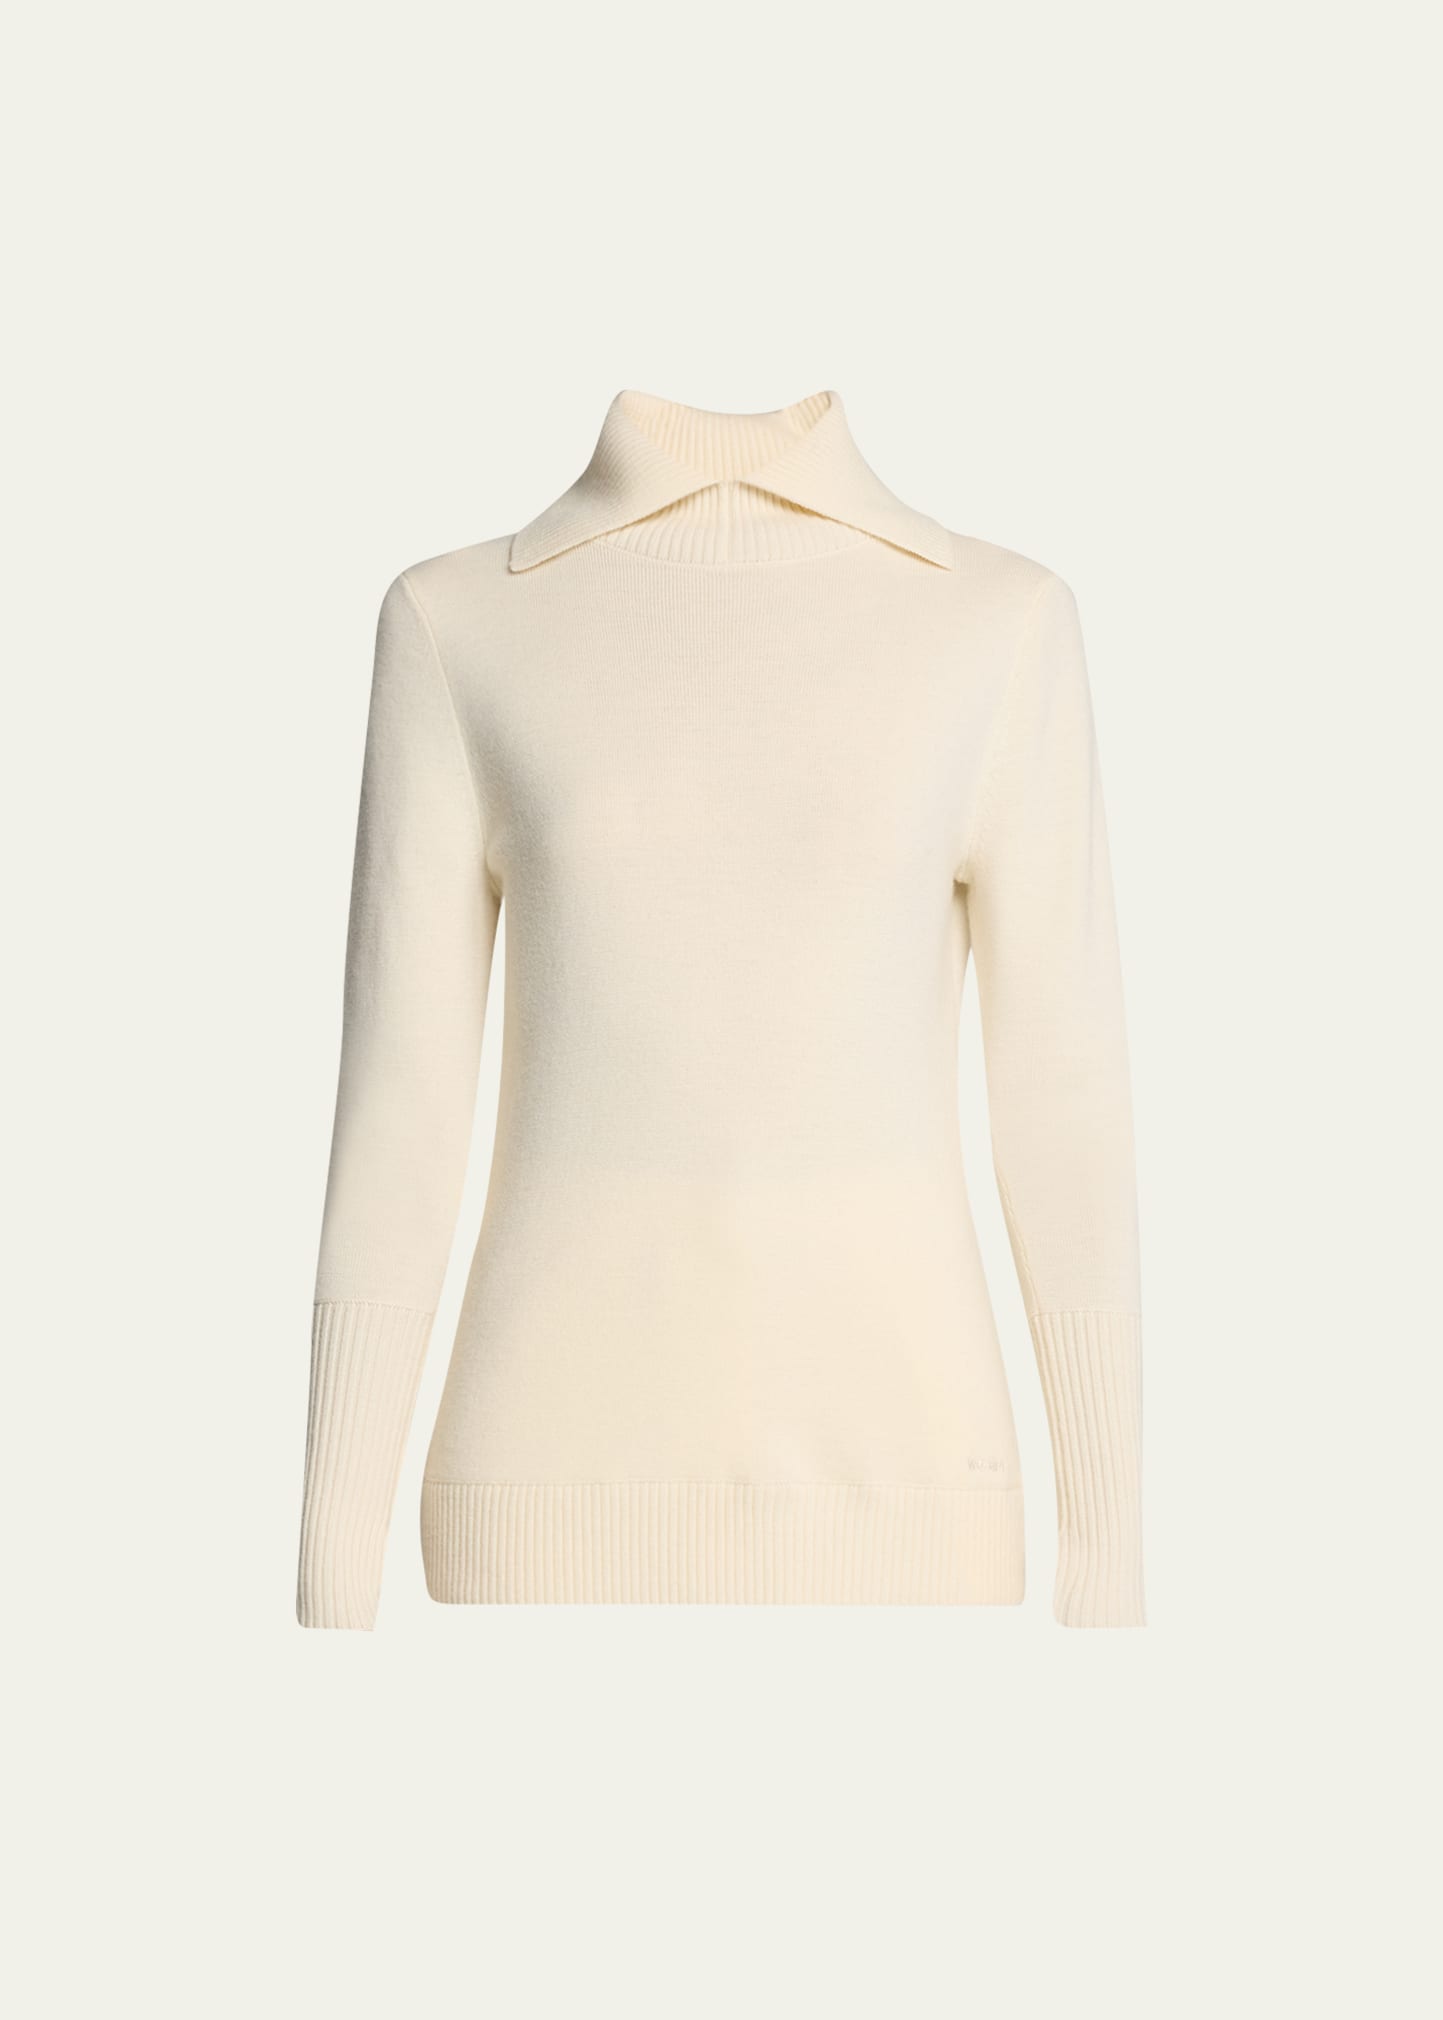 The Base Layer Top